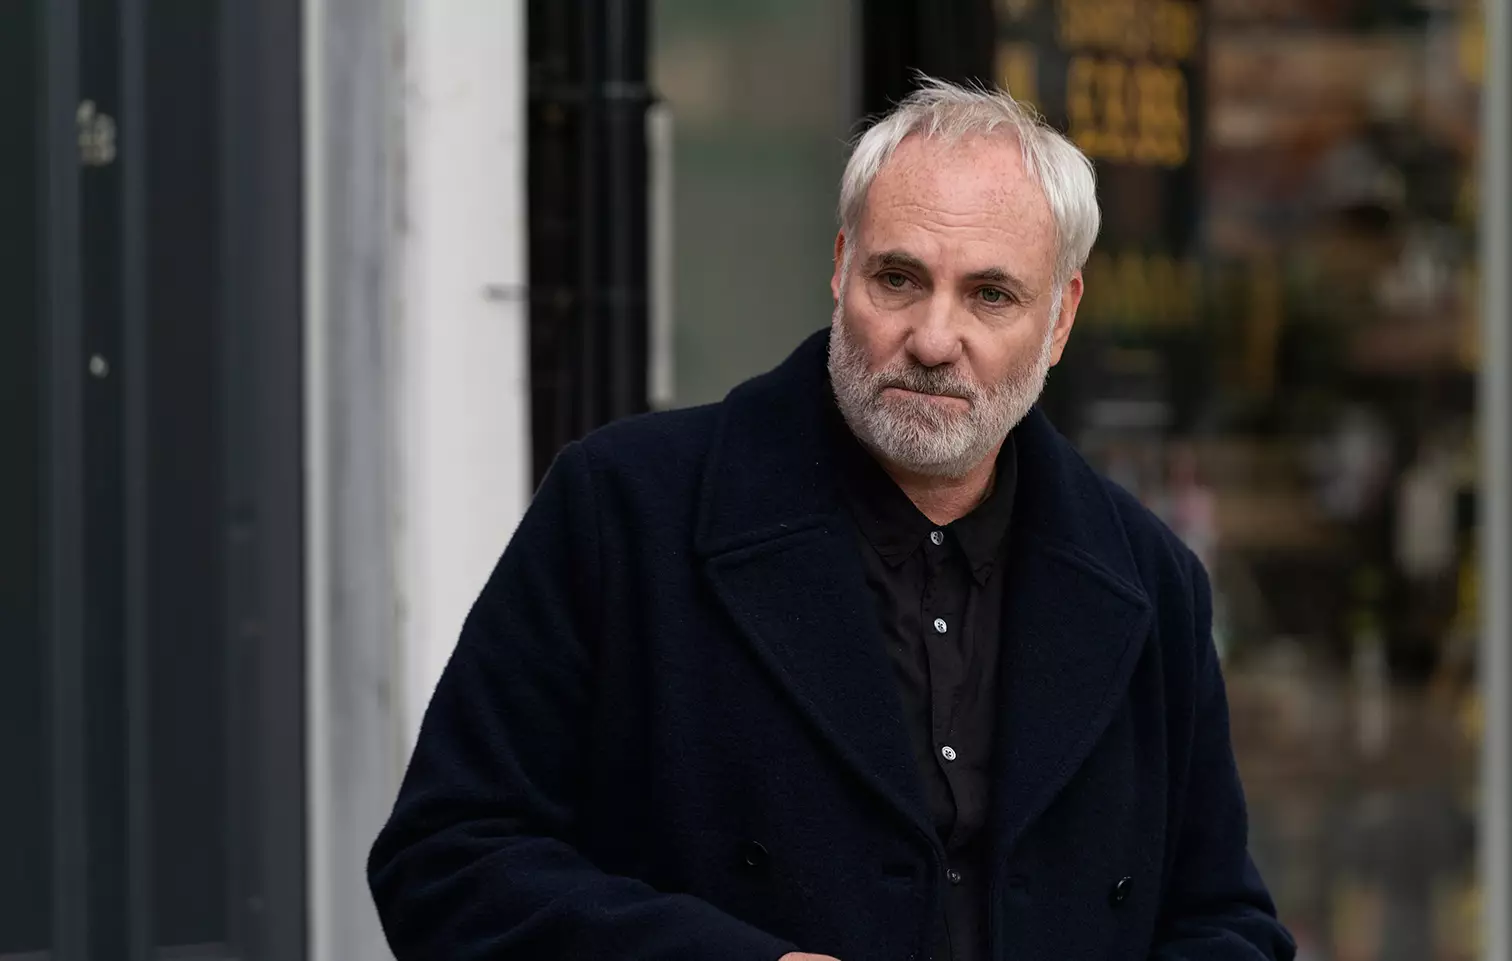 Konstantin (played by Kim Bodnia) is back on our screens (